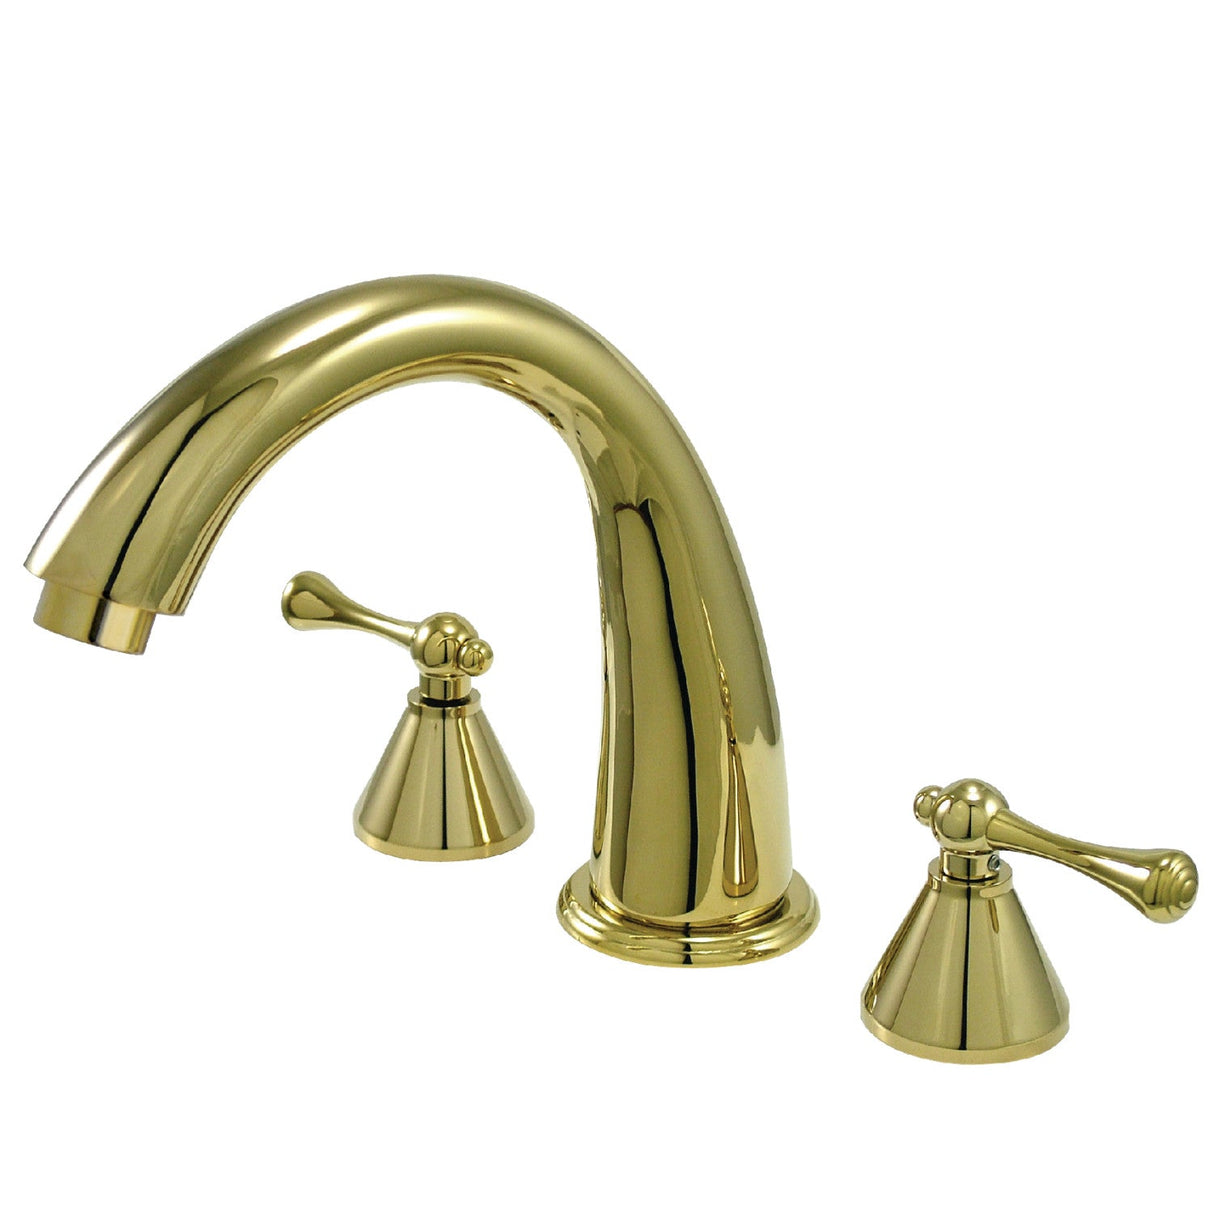 English Country KS2362BL Two-Handle 3-Hole Deck Mount Roman Tub Faucet, Polished Brass